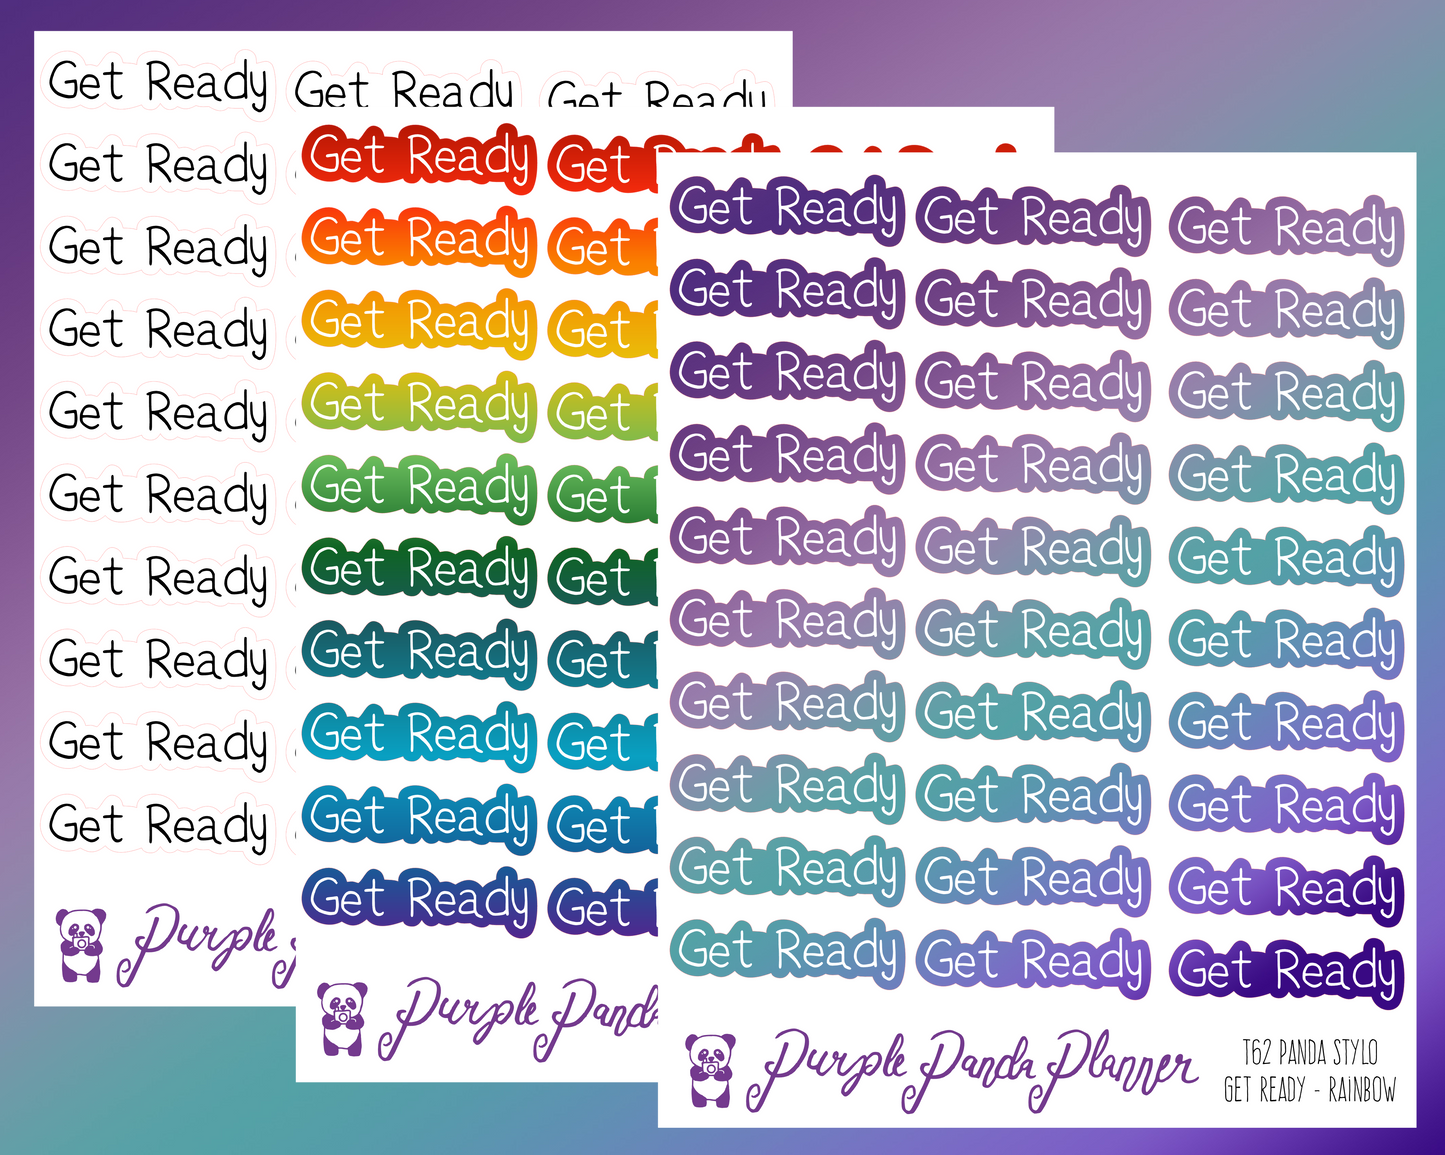 Get Ready (T62) - Panda Stylo Script - Black, Rainbow, or Purple Ombre - Stickers for Planner, Journal or Calendar